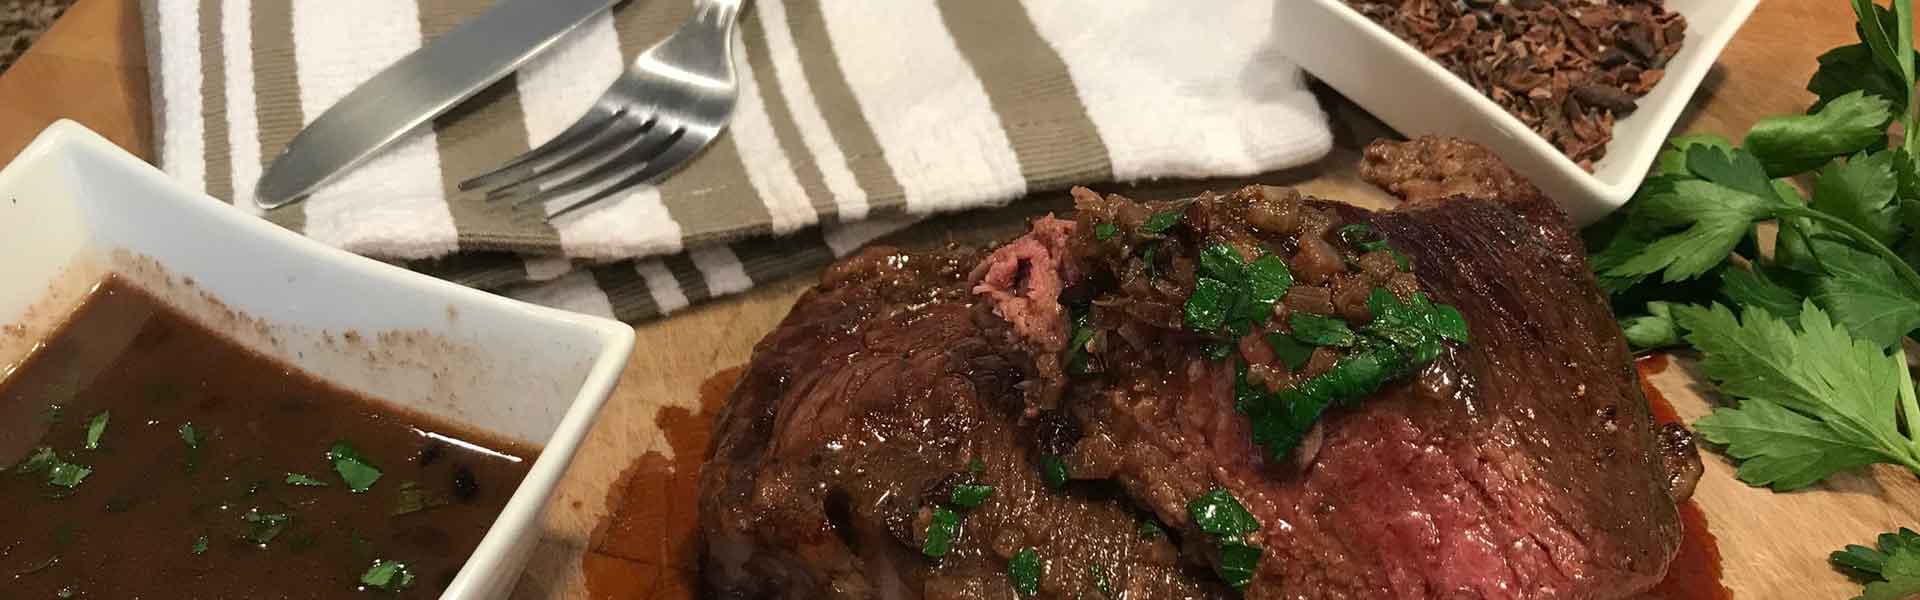 Christensen Ranch Recipes Cacao Nib Crusted Steak with Red Wine & Chocolate Sauce